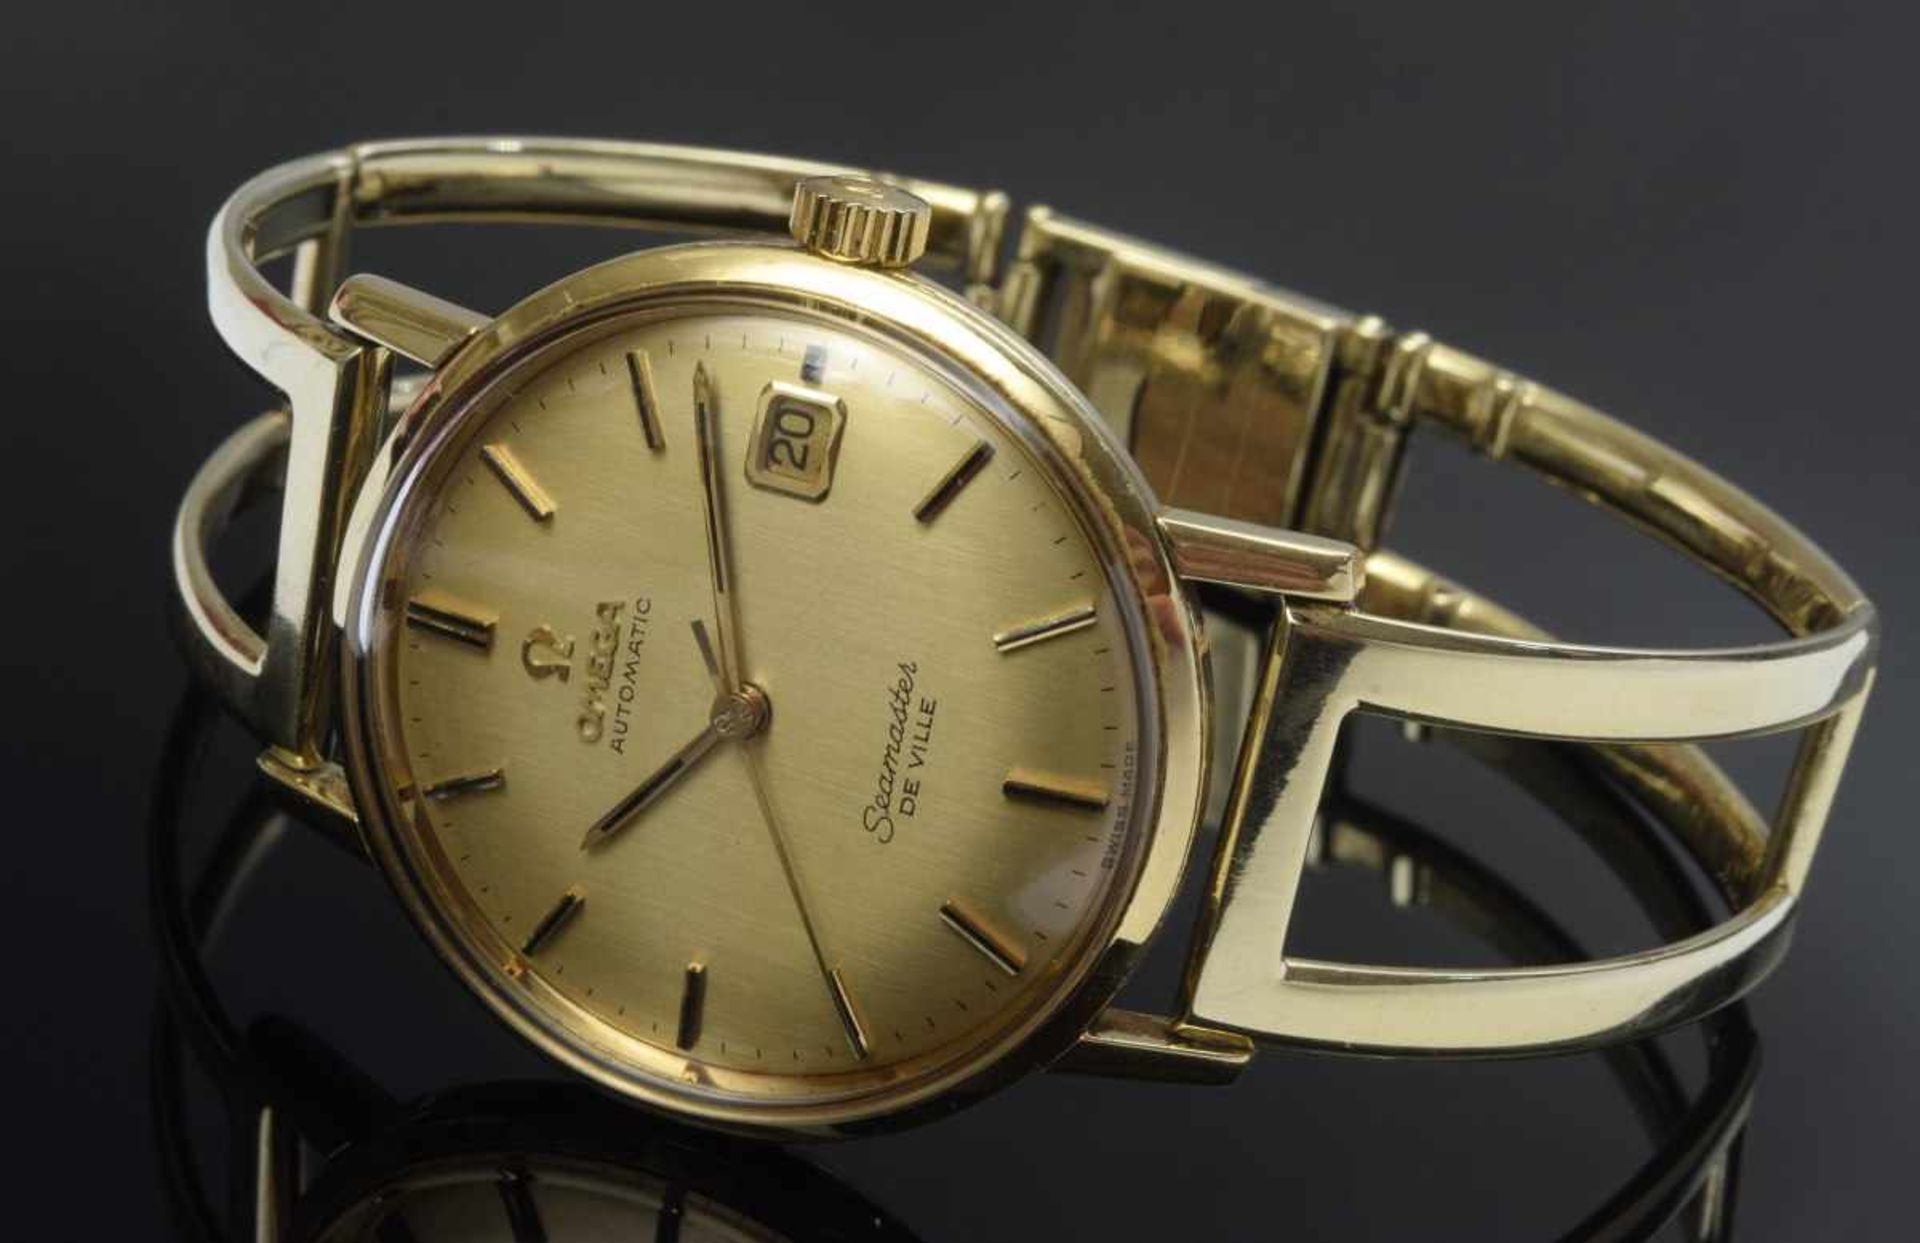 GG 750 Omega "Seamaster De Ville" watch with openworked GG 585 strap, automatic movement, date,